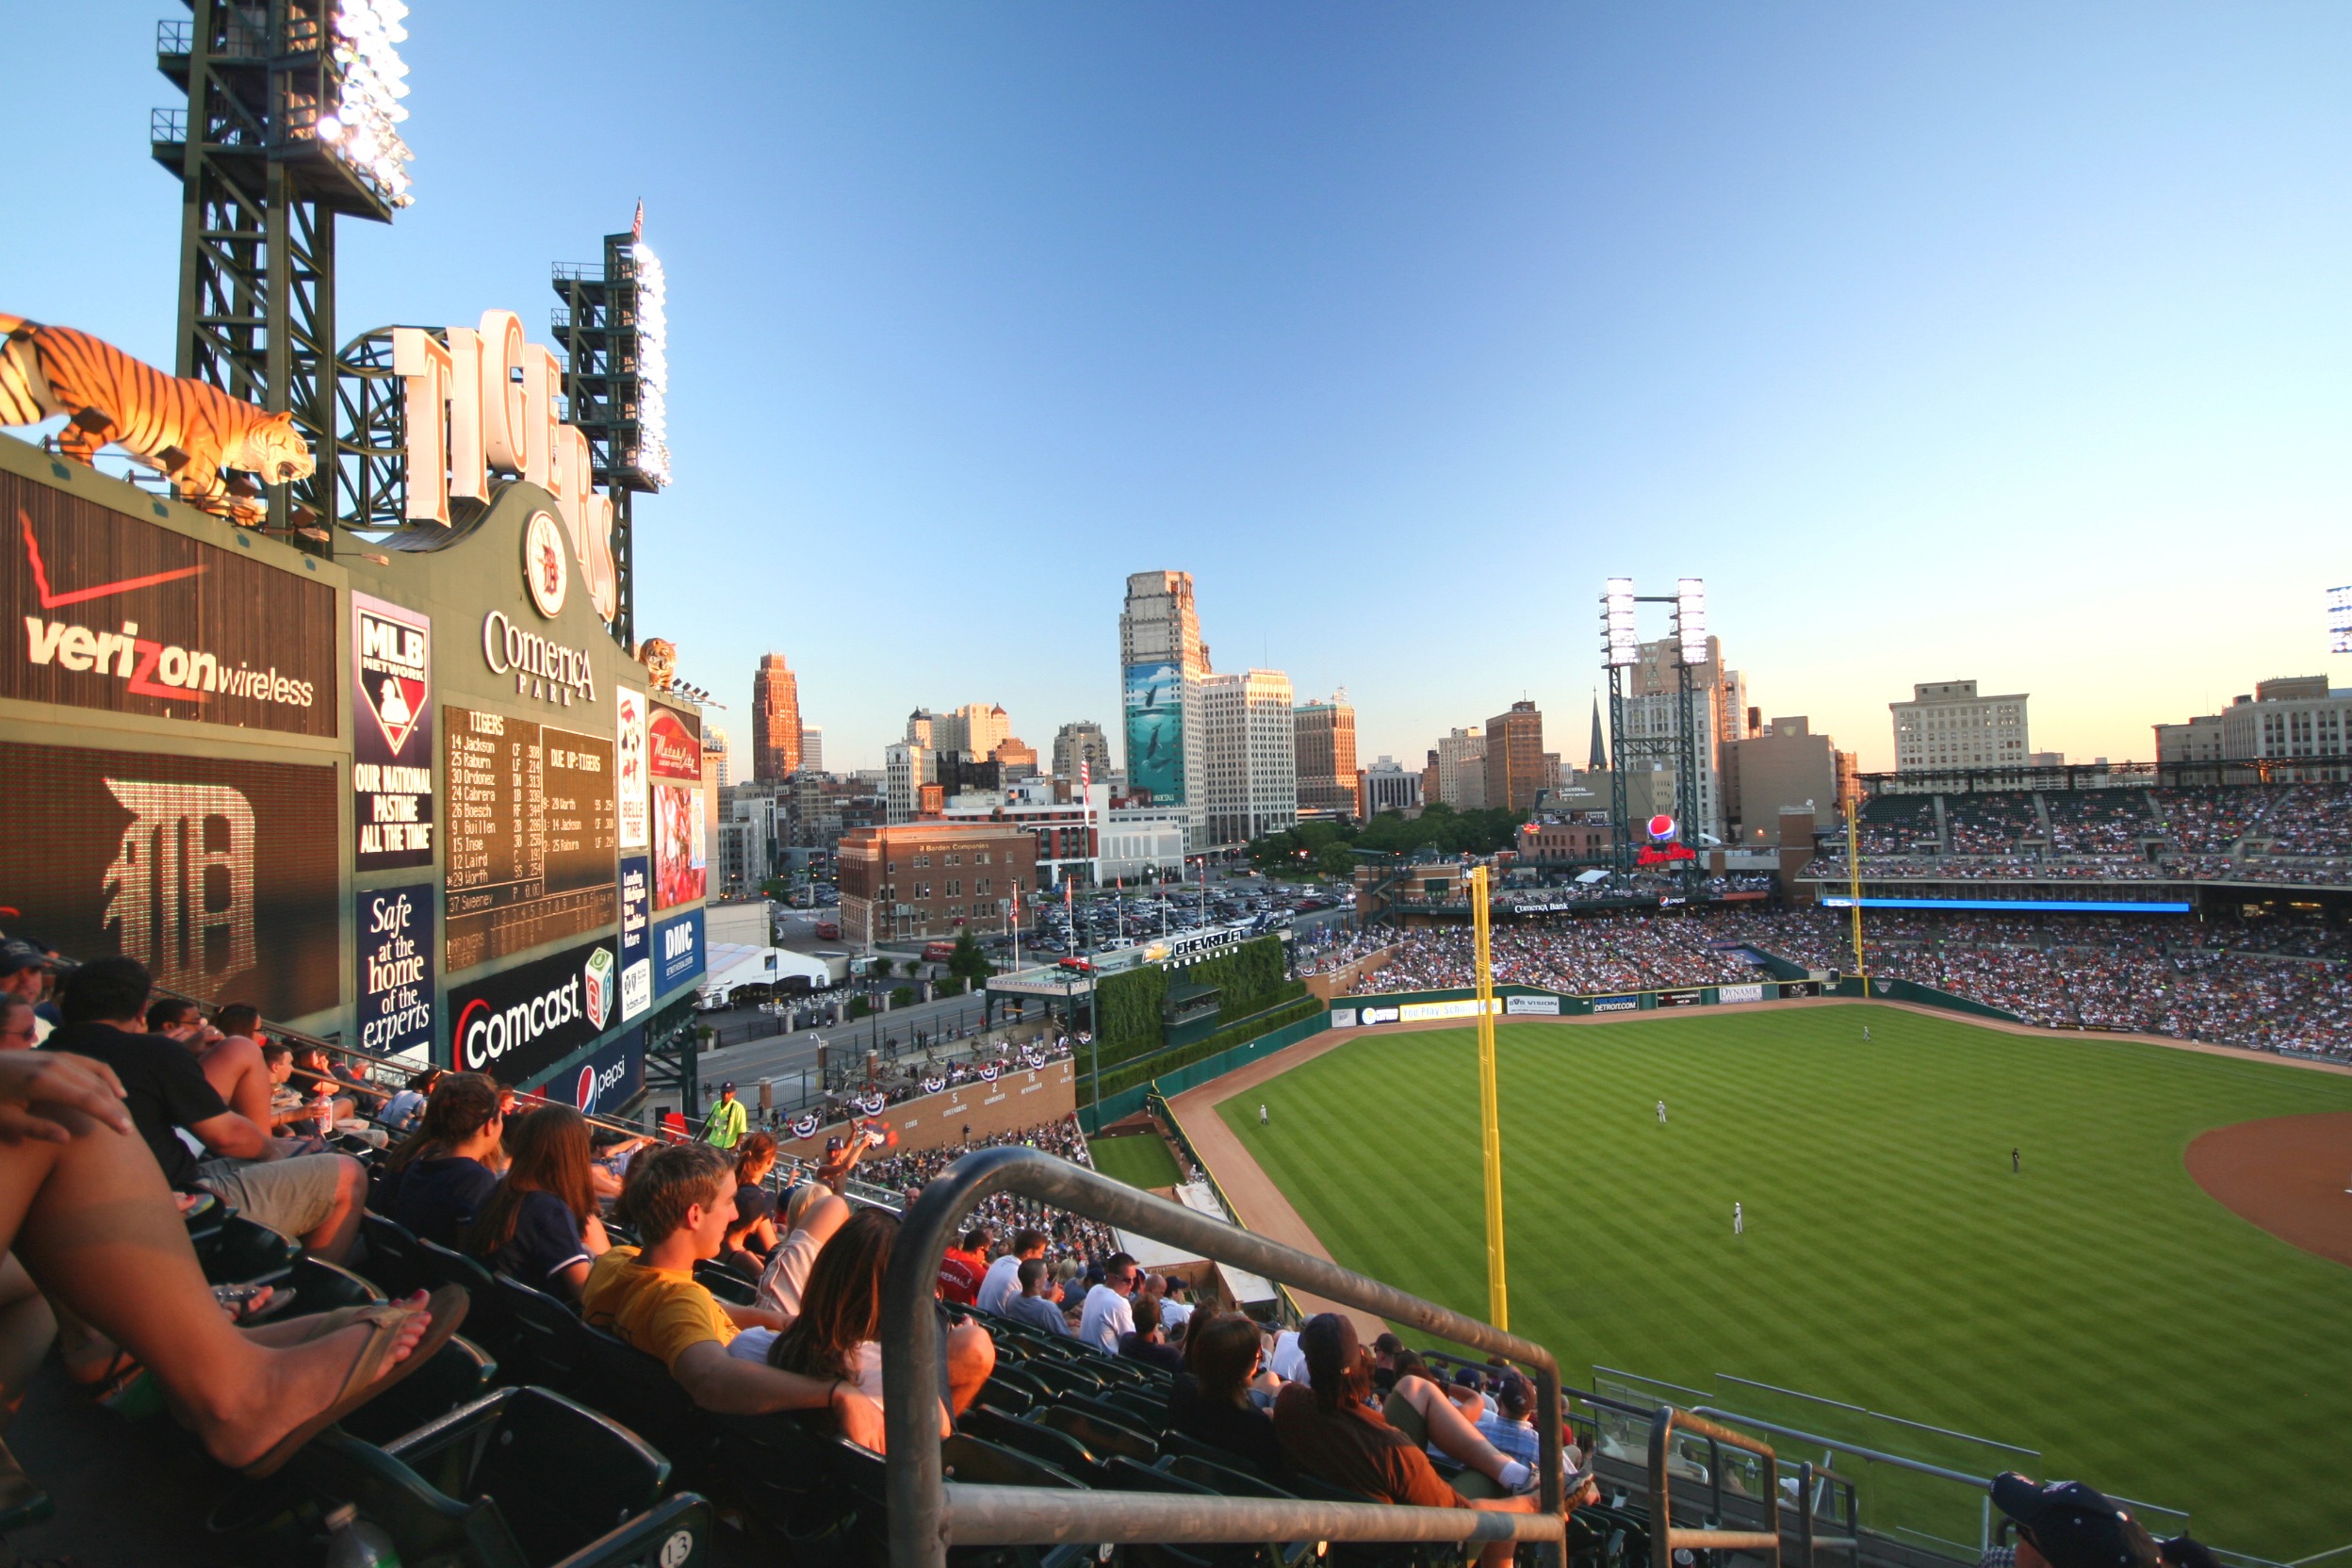 view from the seat in Comerica Park